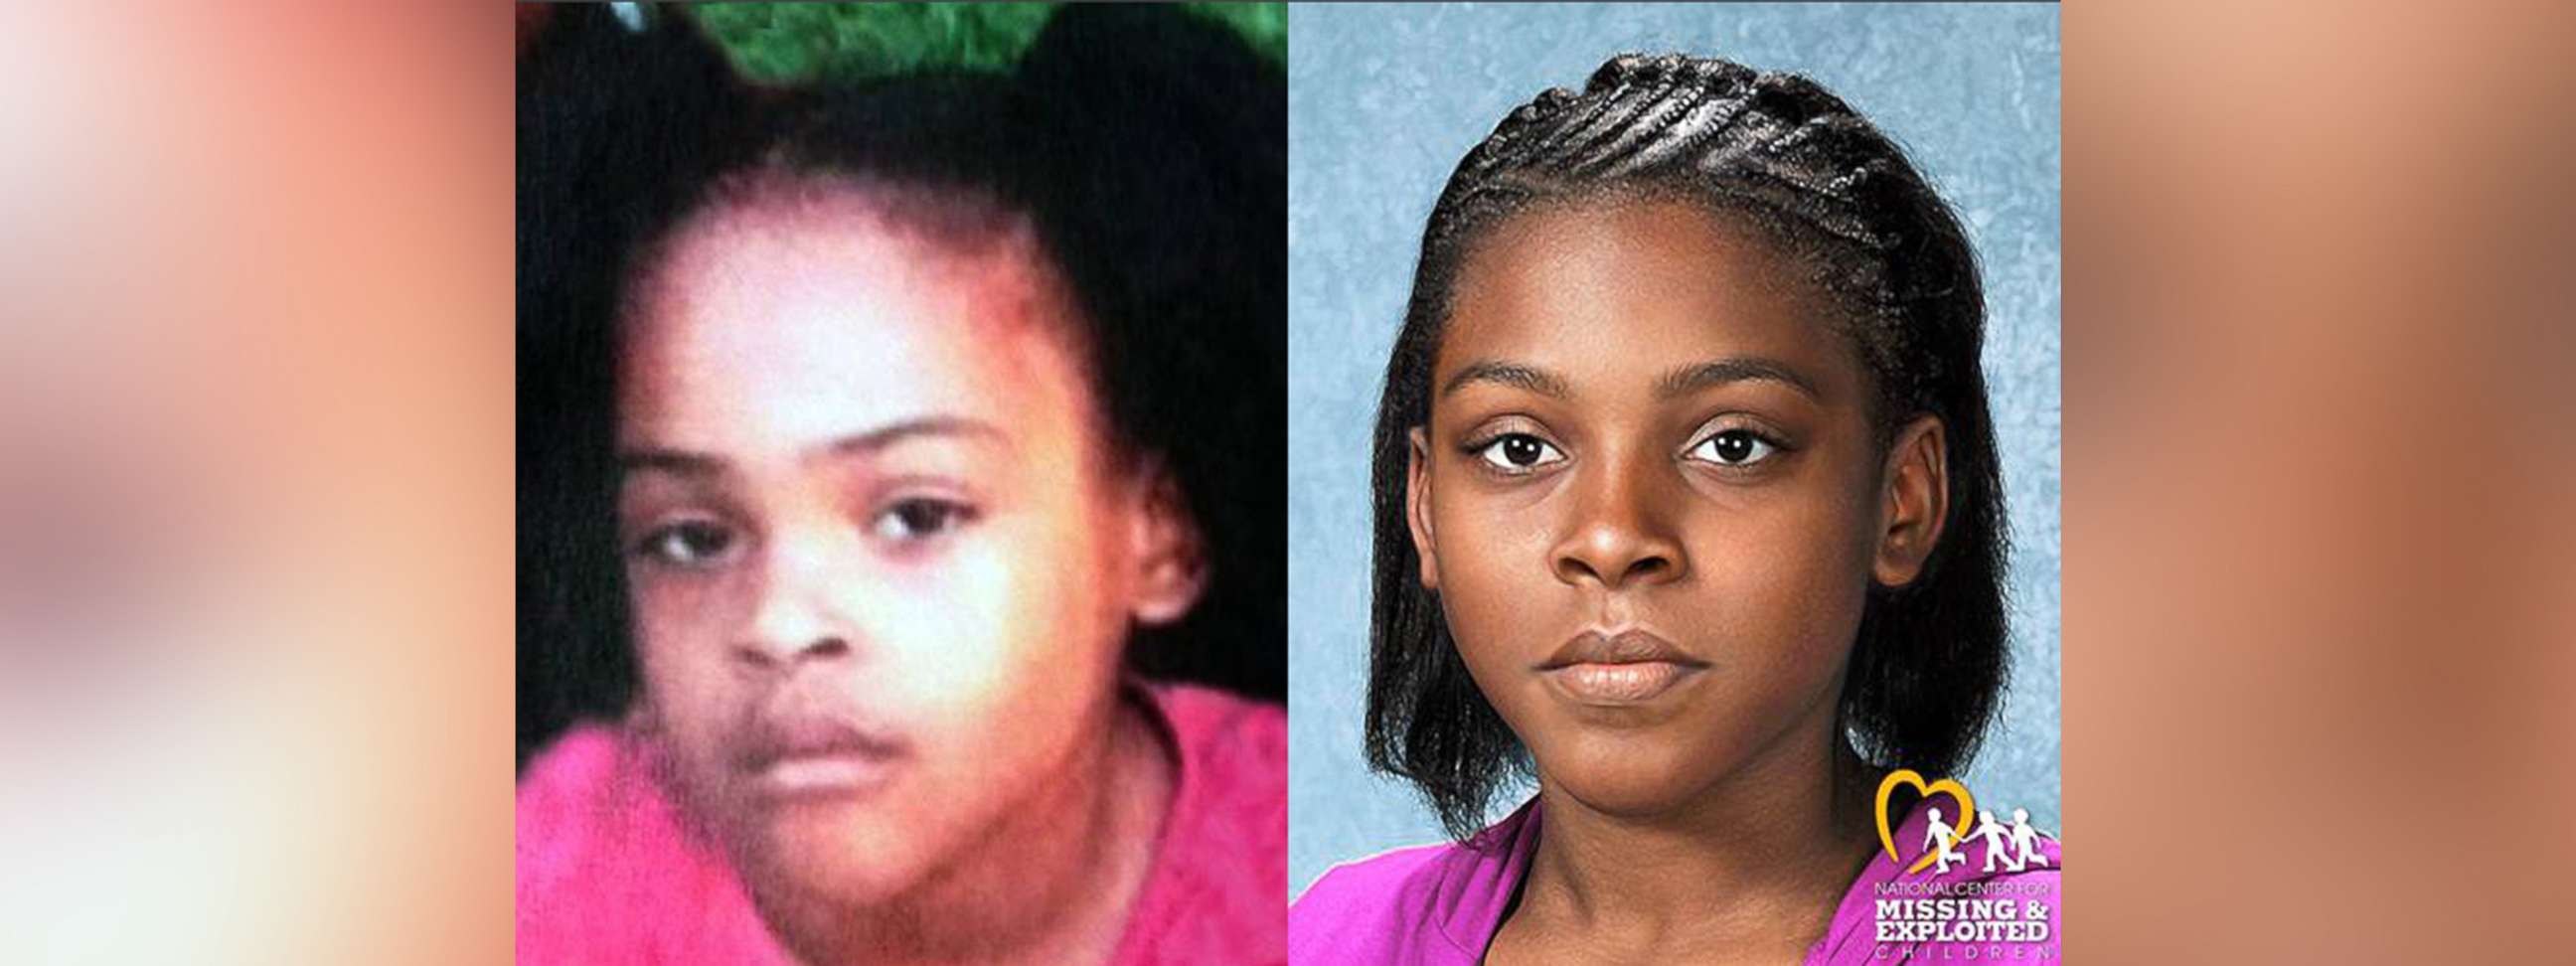 PHOTO: Relisha Rudd vanished in Washington, D.C., on March 19, 2014. Forensic artists with the National Center for Missing & Exploited Children created this progression image for what she may look like in 2020.